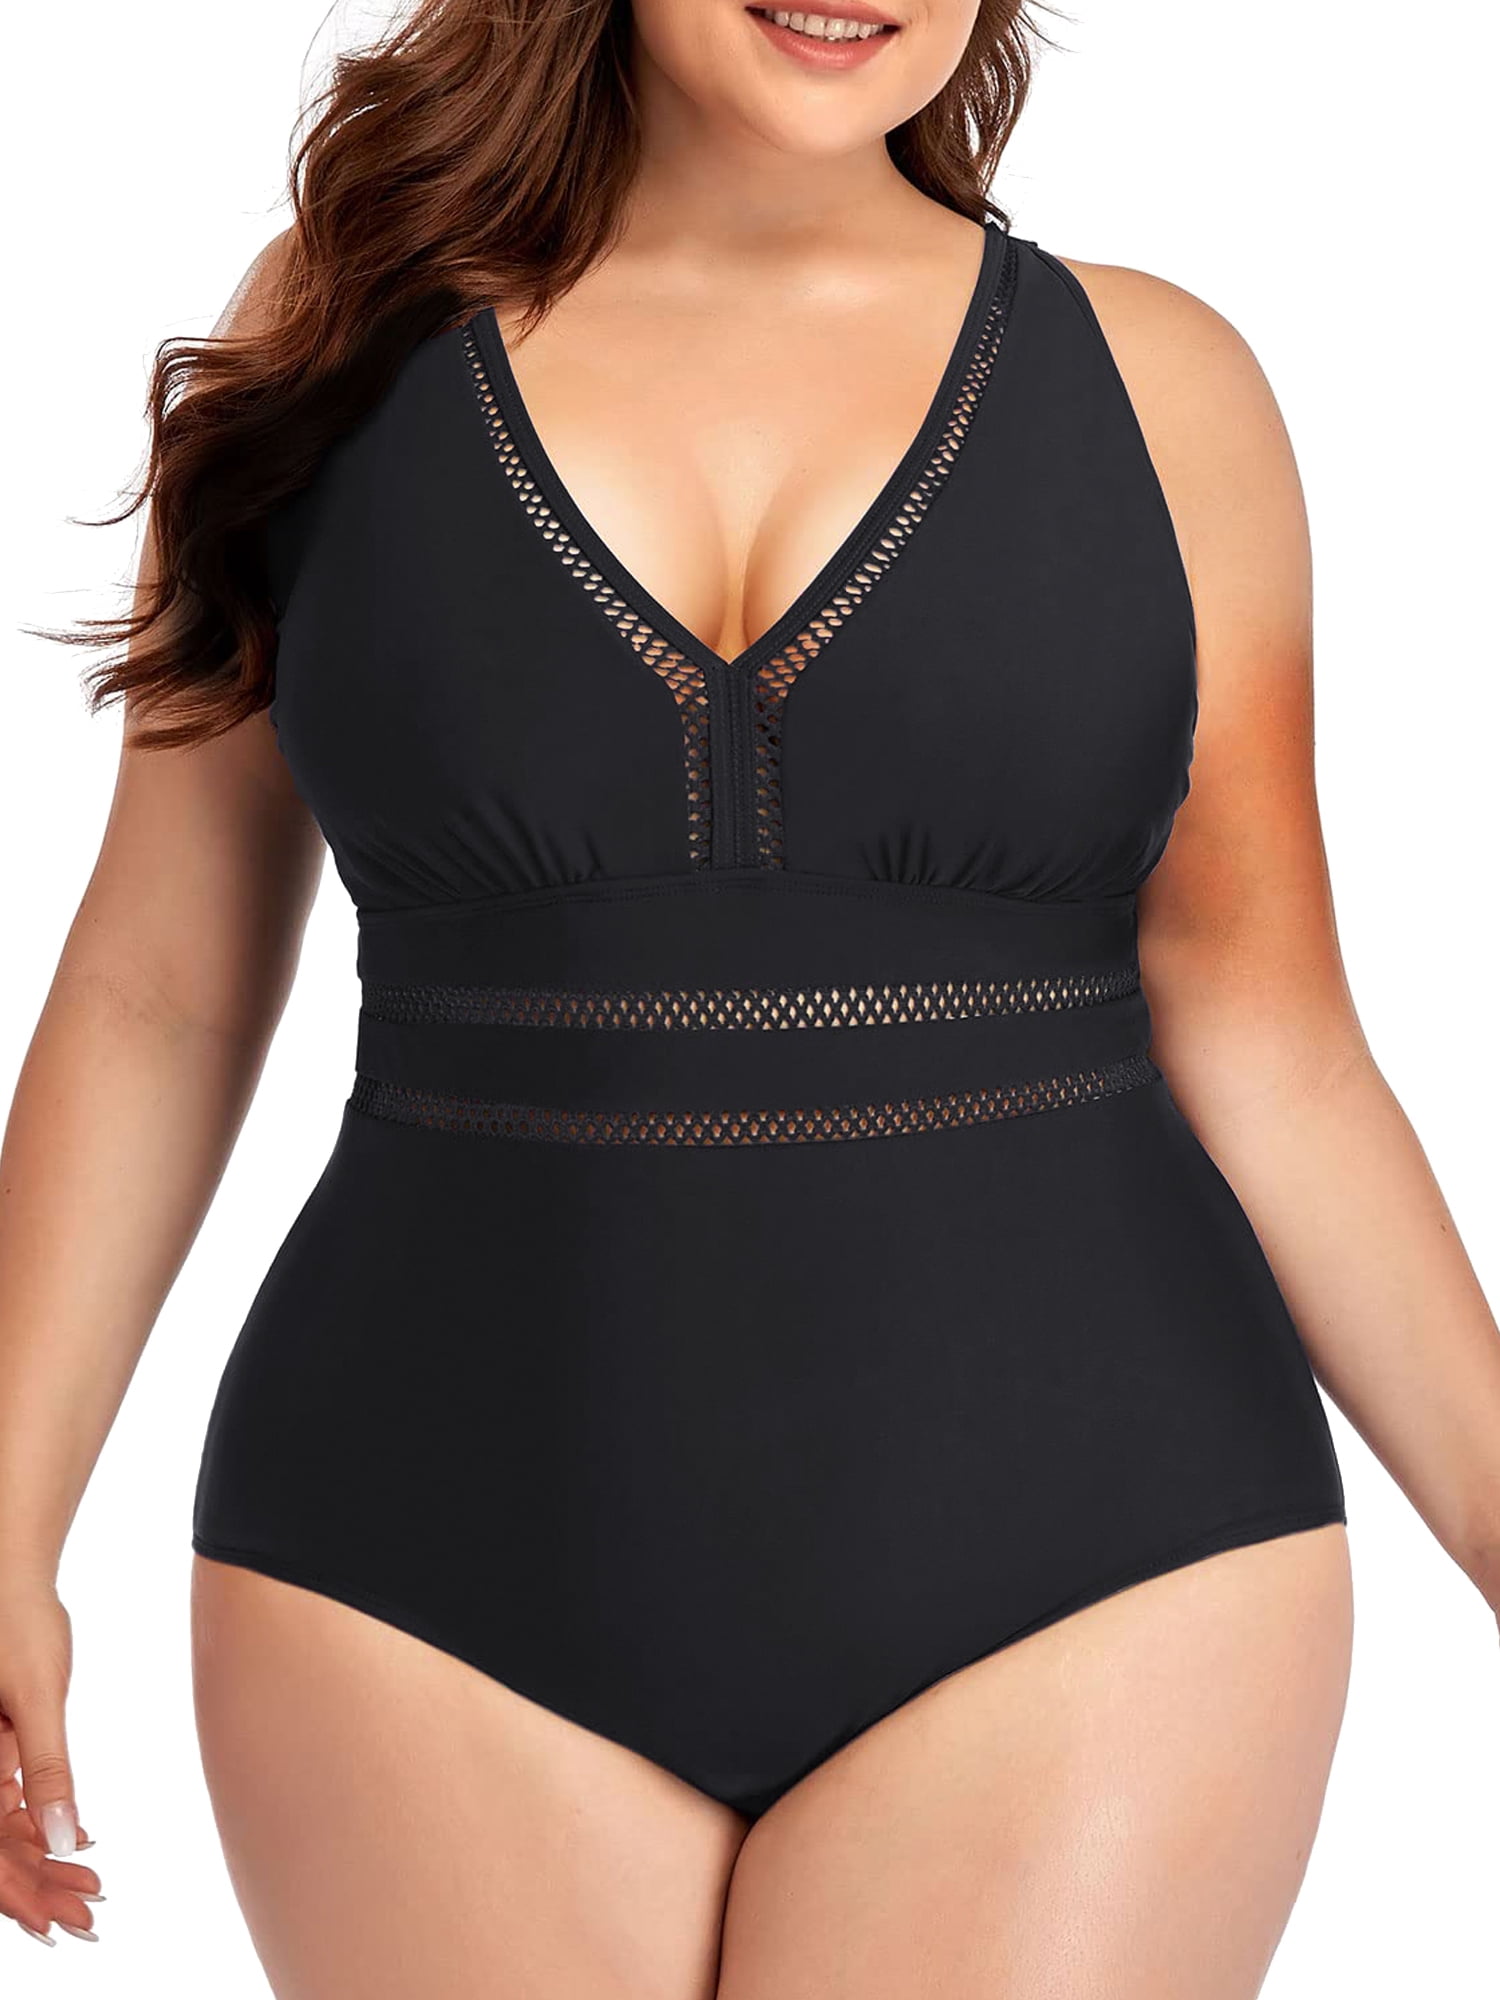 Chama One Piece Swimsuit for Women Plus Size Tummy Control Hollow Out  Bathing Suits 